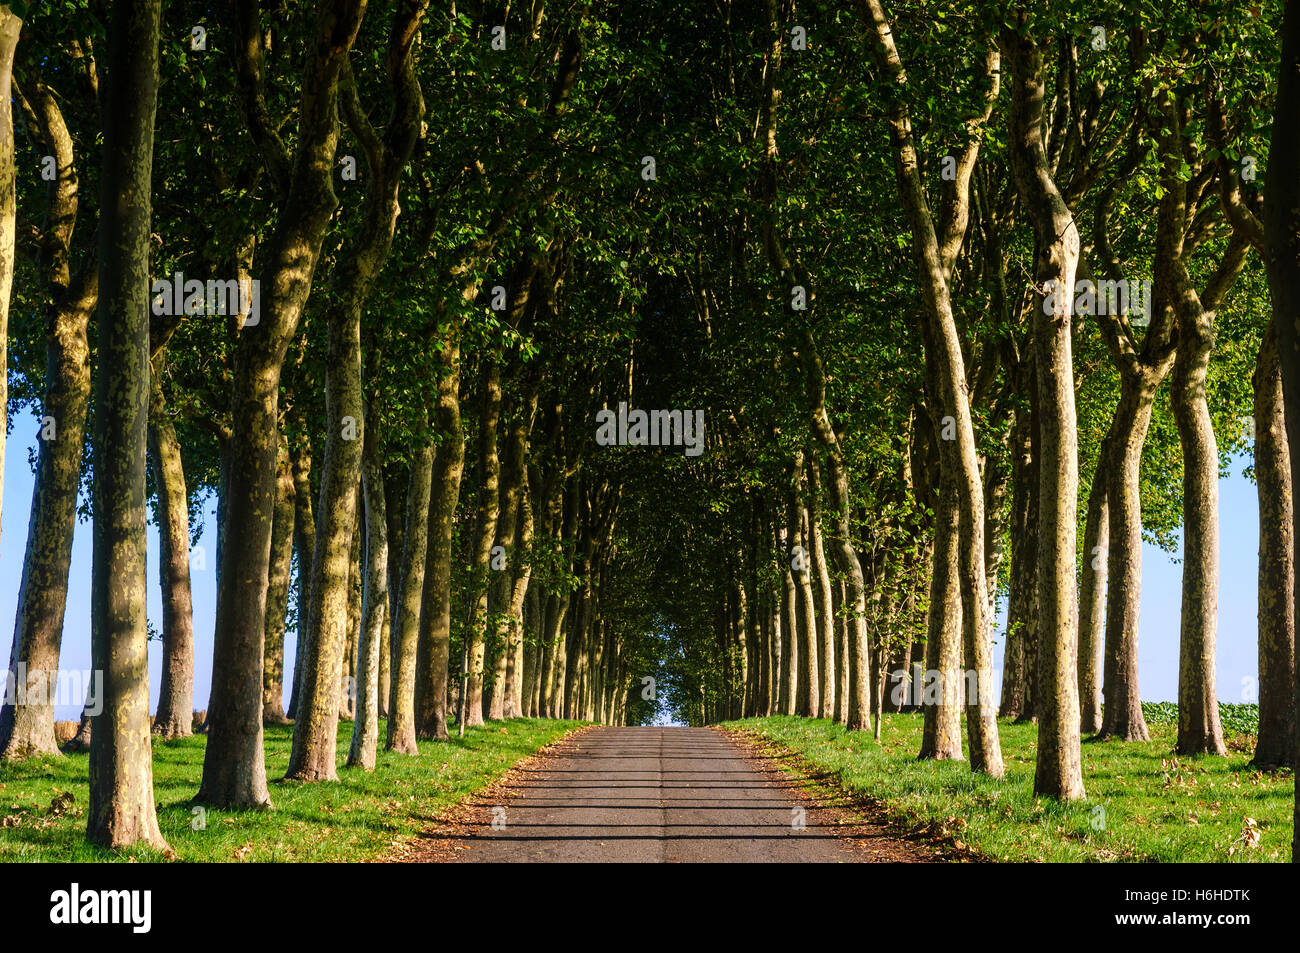 A tree lined country road in France Stock Photo